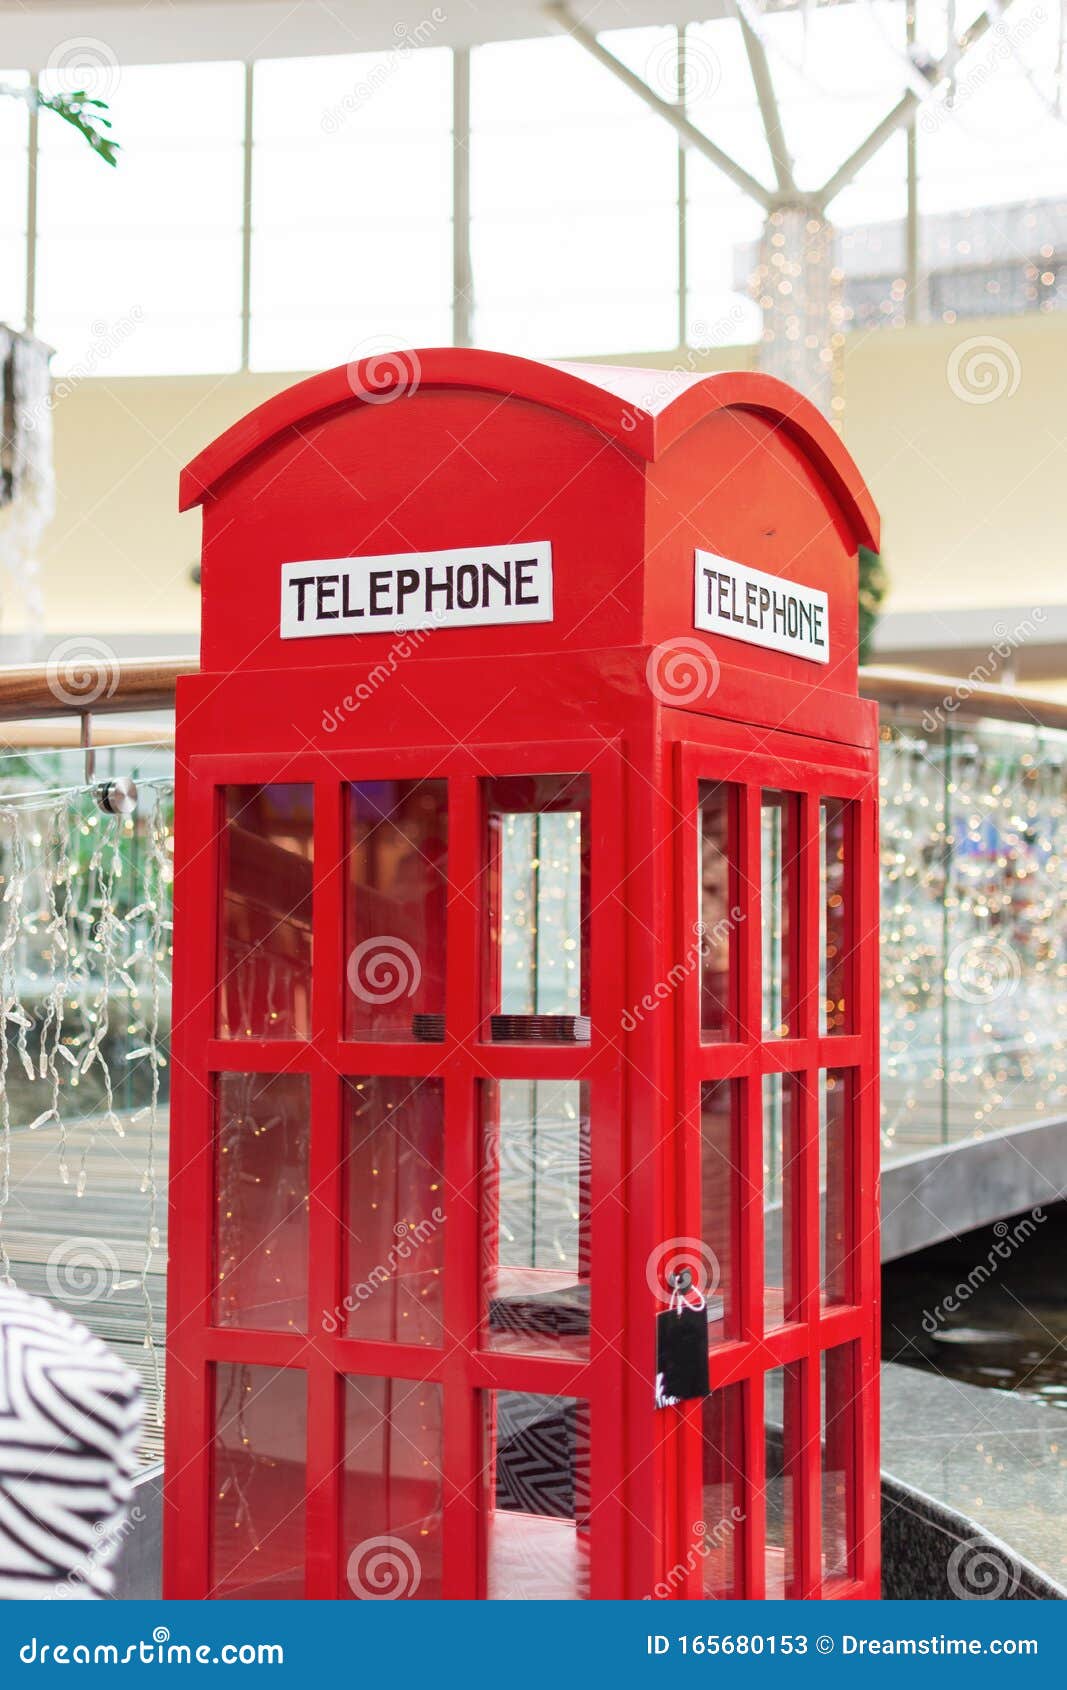 London Style Red Public Telephone Booth Indoor On